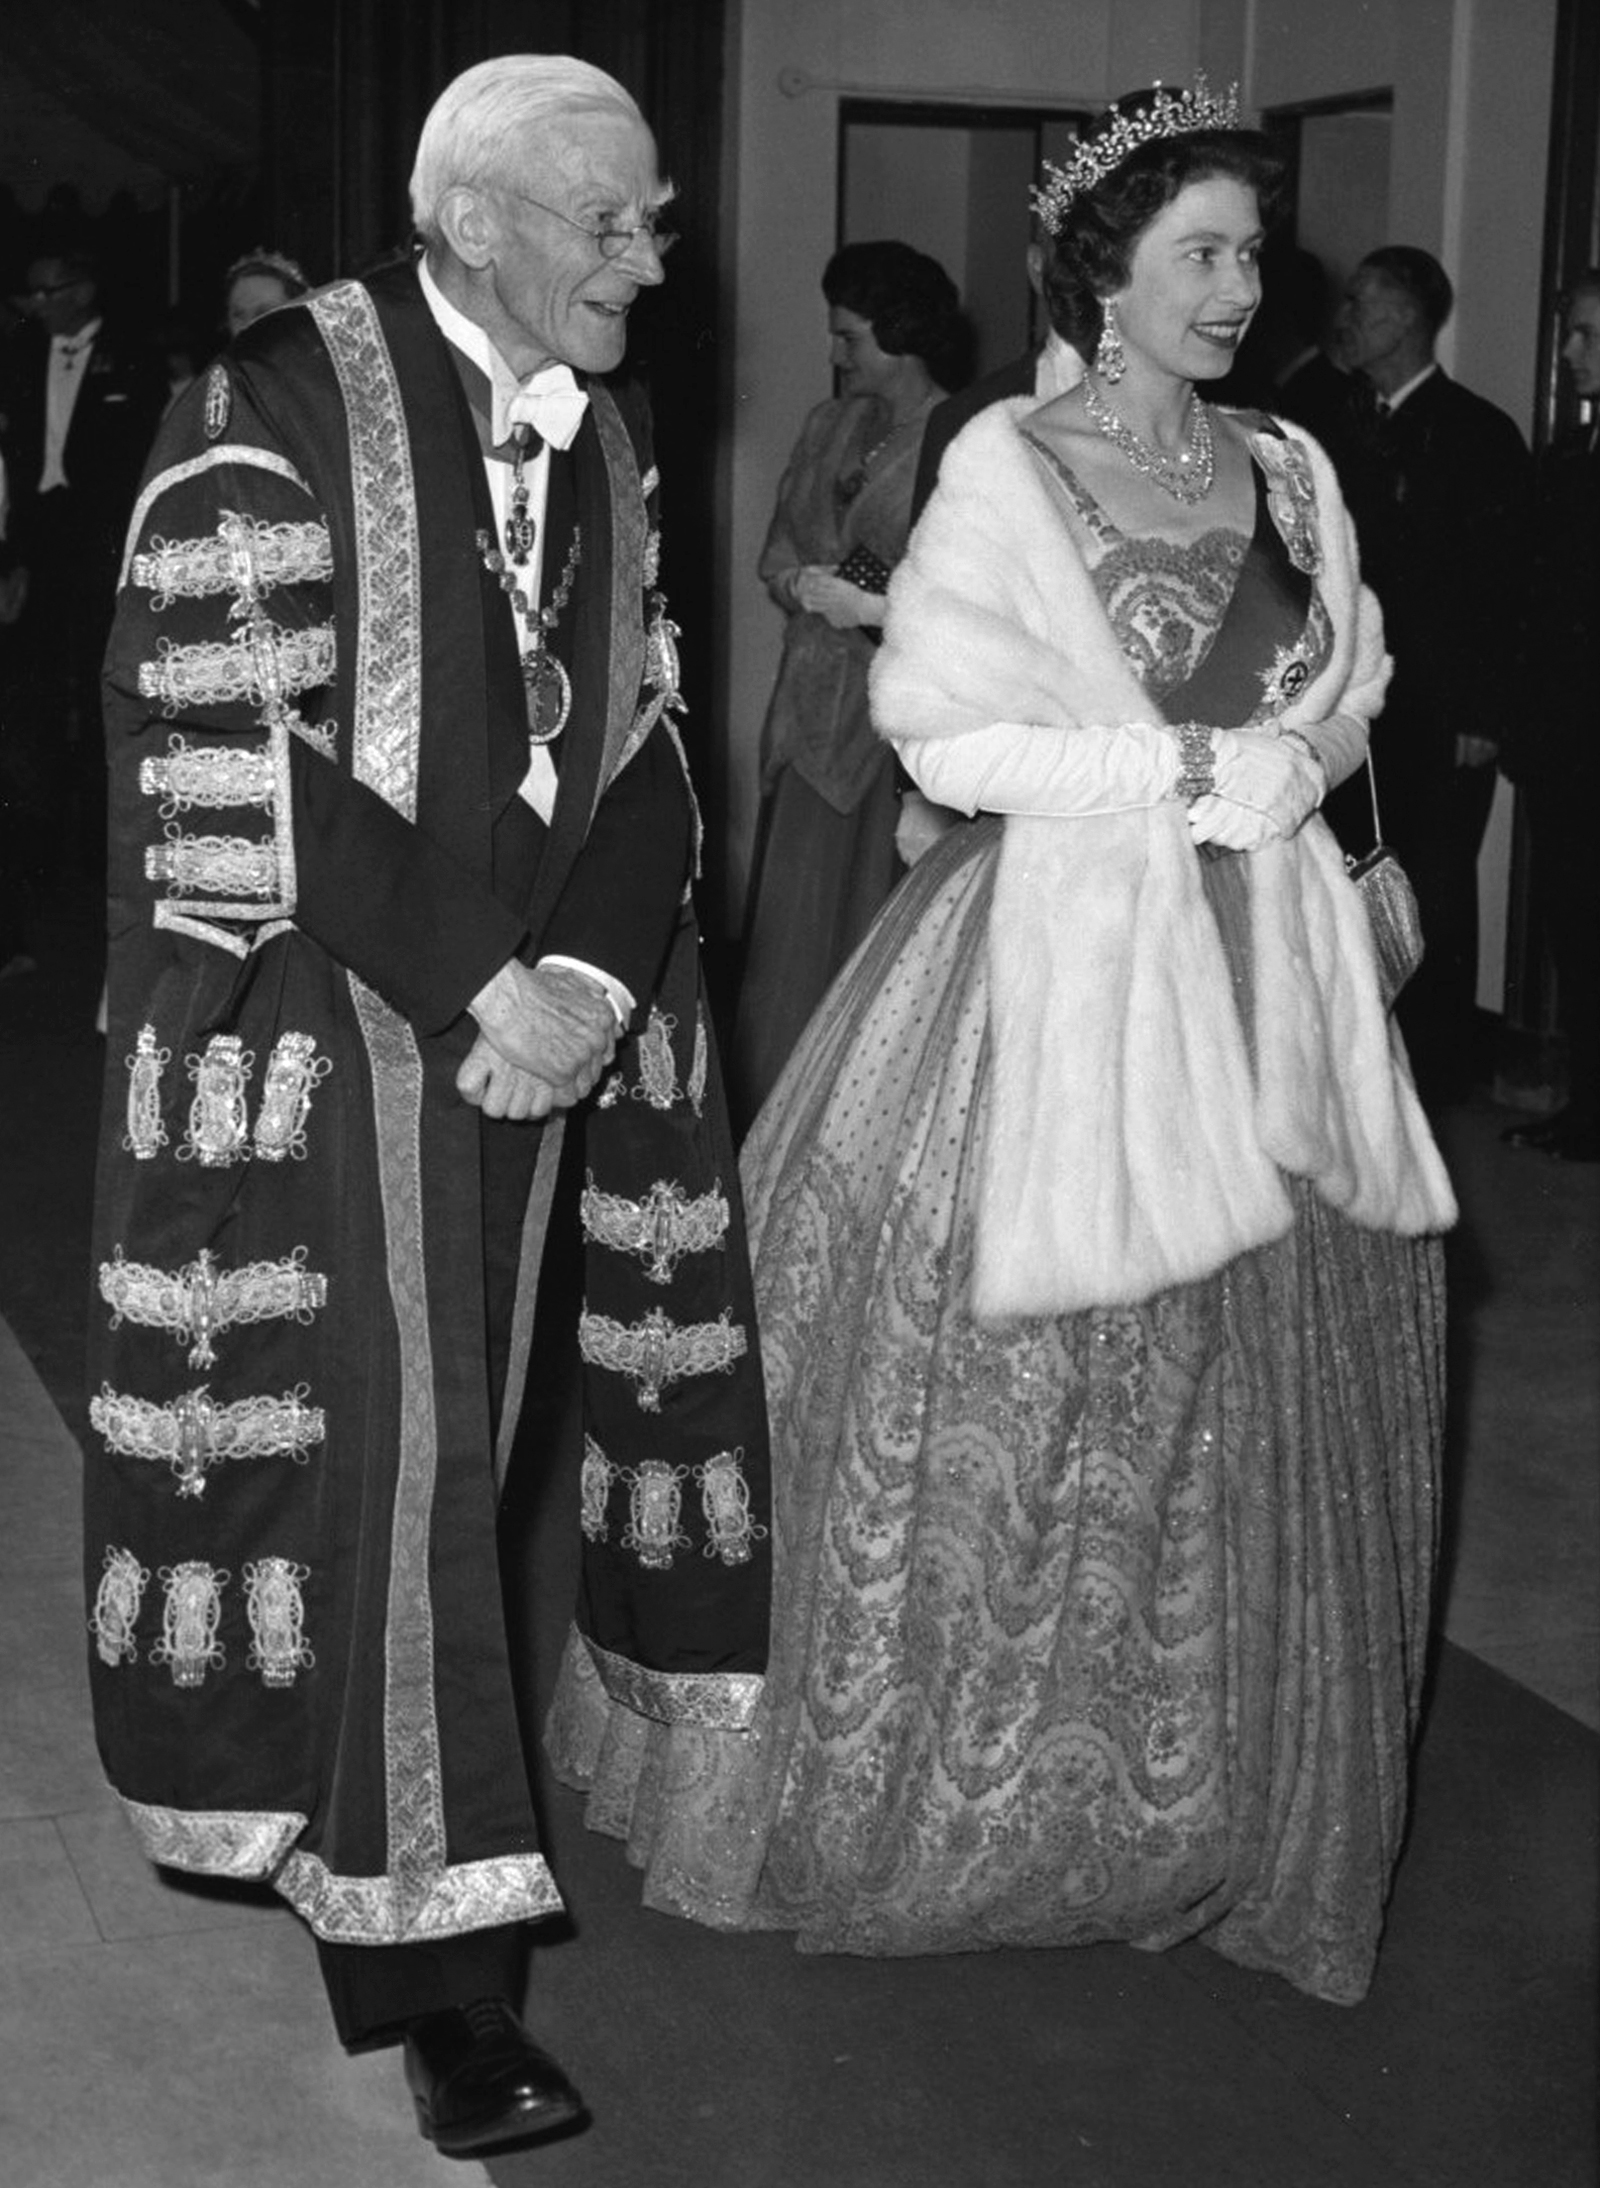 On 21 May 1962 Her Majesty The Queen joined a celebration at the RSM to mark the 50th anniversary of the opening of the building in 1912 by King George V and Queen Mary.